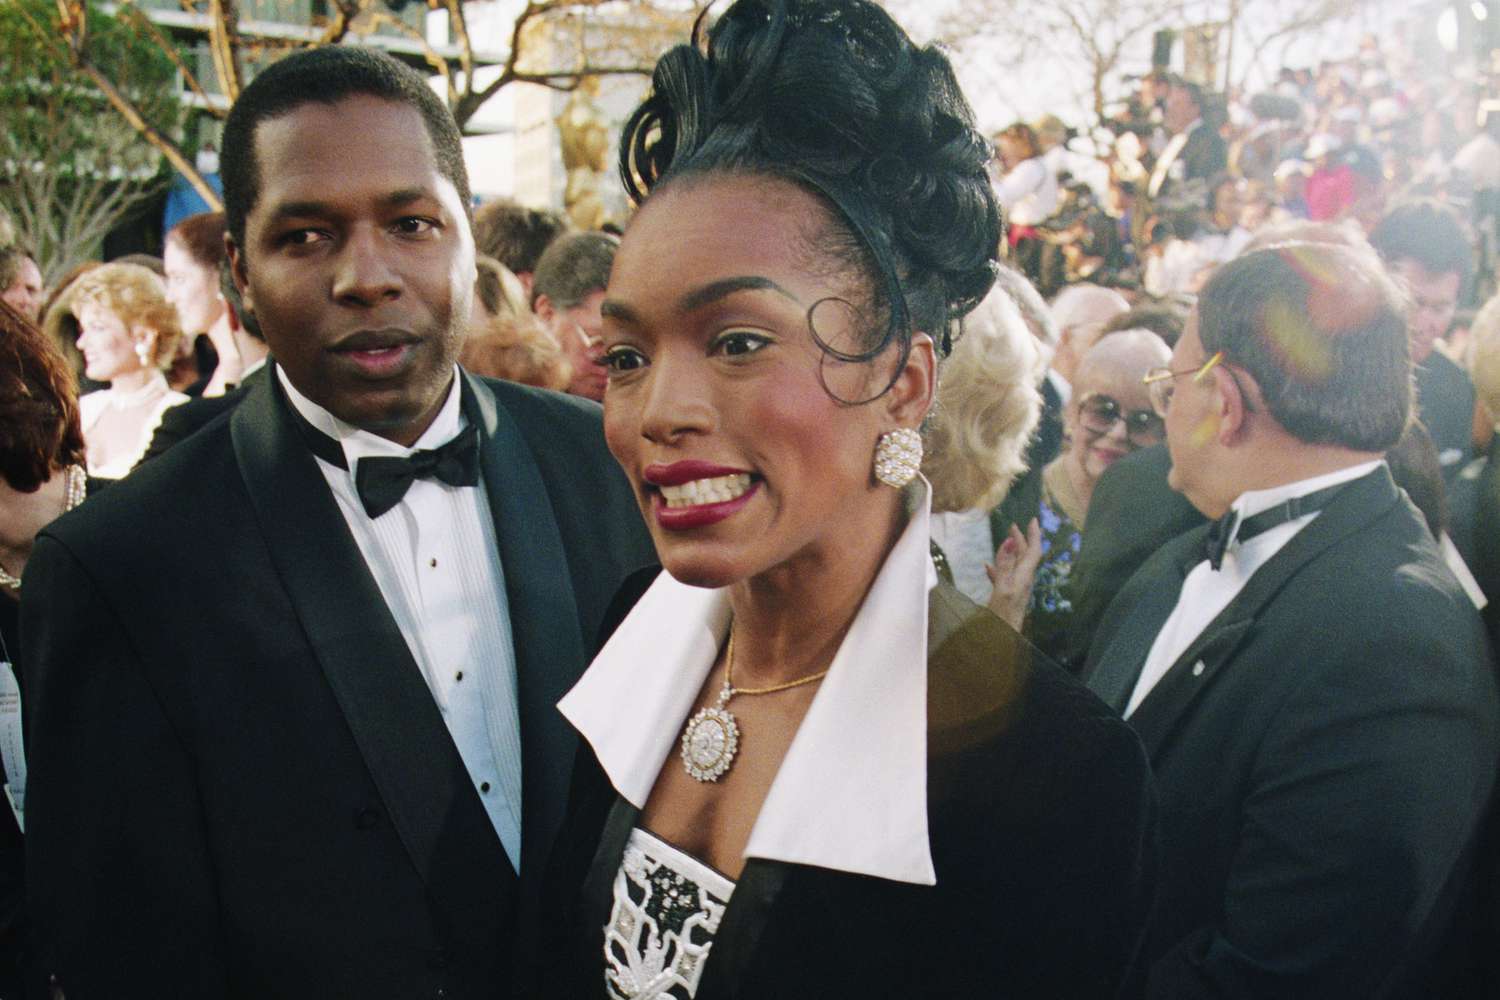 Angela Bassett and Courtney B. Vance arrive at the 1994 Academy Awards Ceremony. Bassett was nominated for the Best Actress award for her role as Tina Turner in the 1993 film, What's Love Got to Do with It.